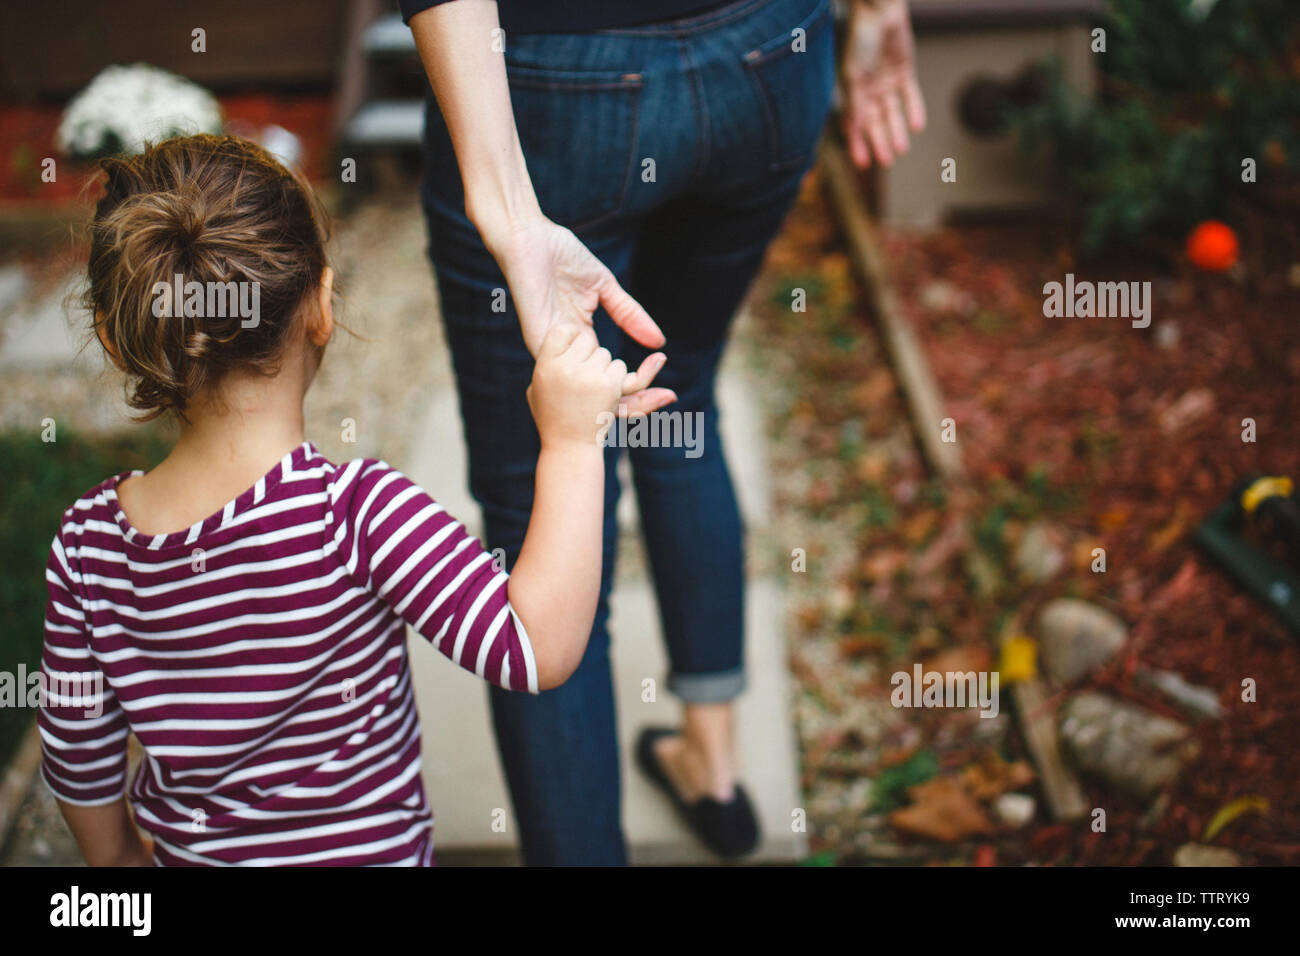 a toddler girl reaches up to hold her mothers hand as they walk Stock Photo